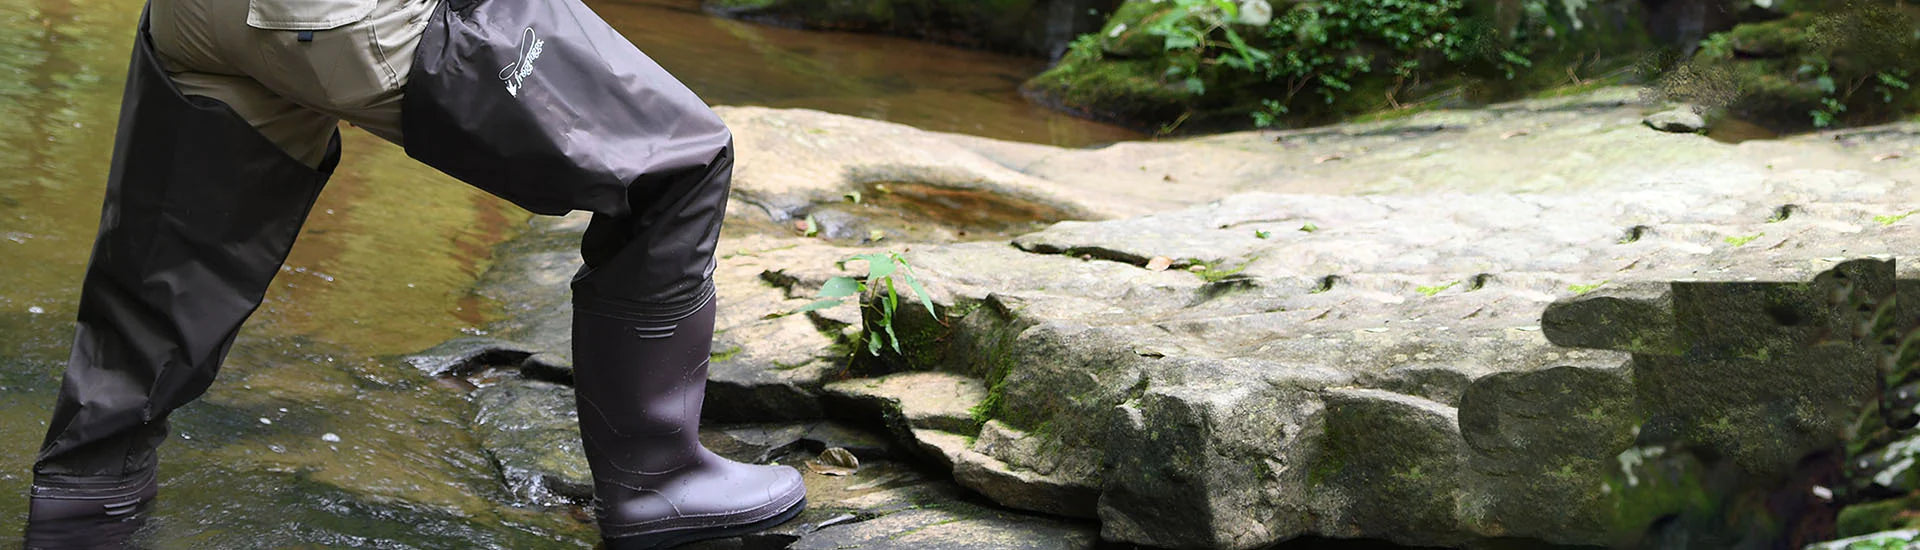 Hip Waders 60cm High Knee High Fishing Boots, Waterproof and Wear